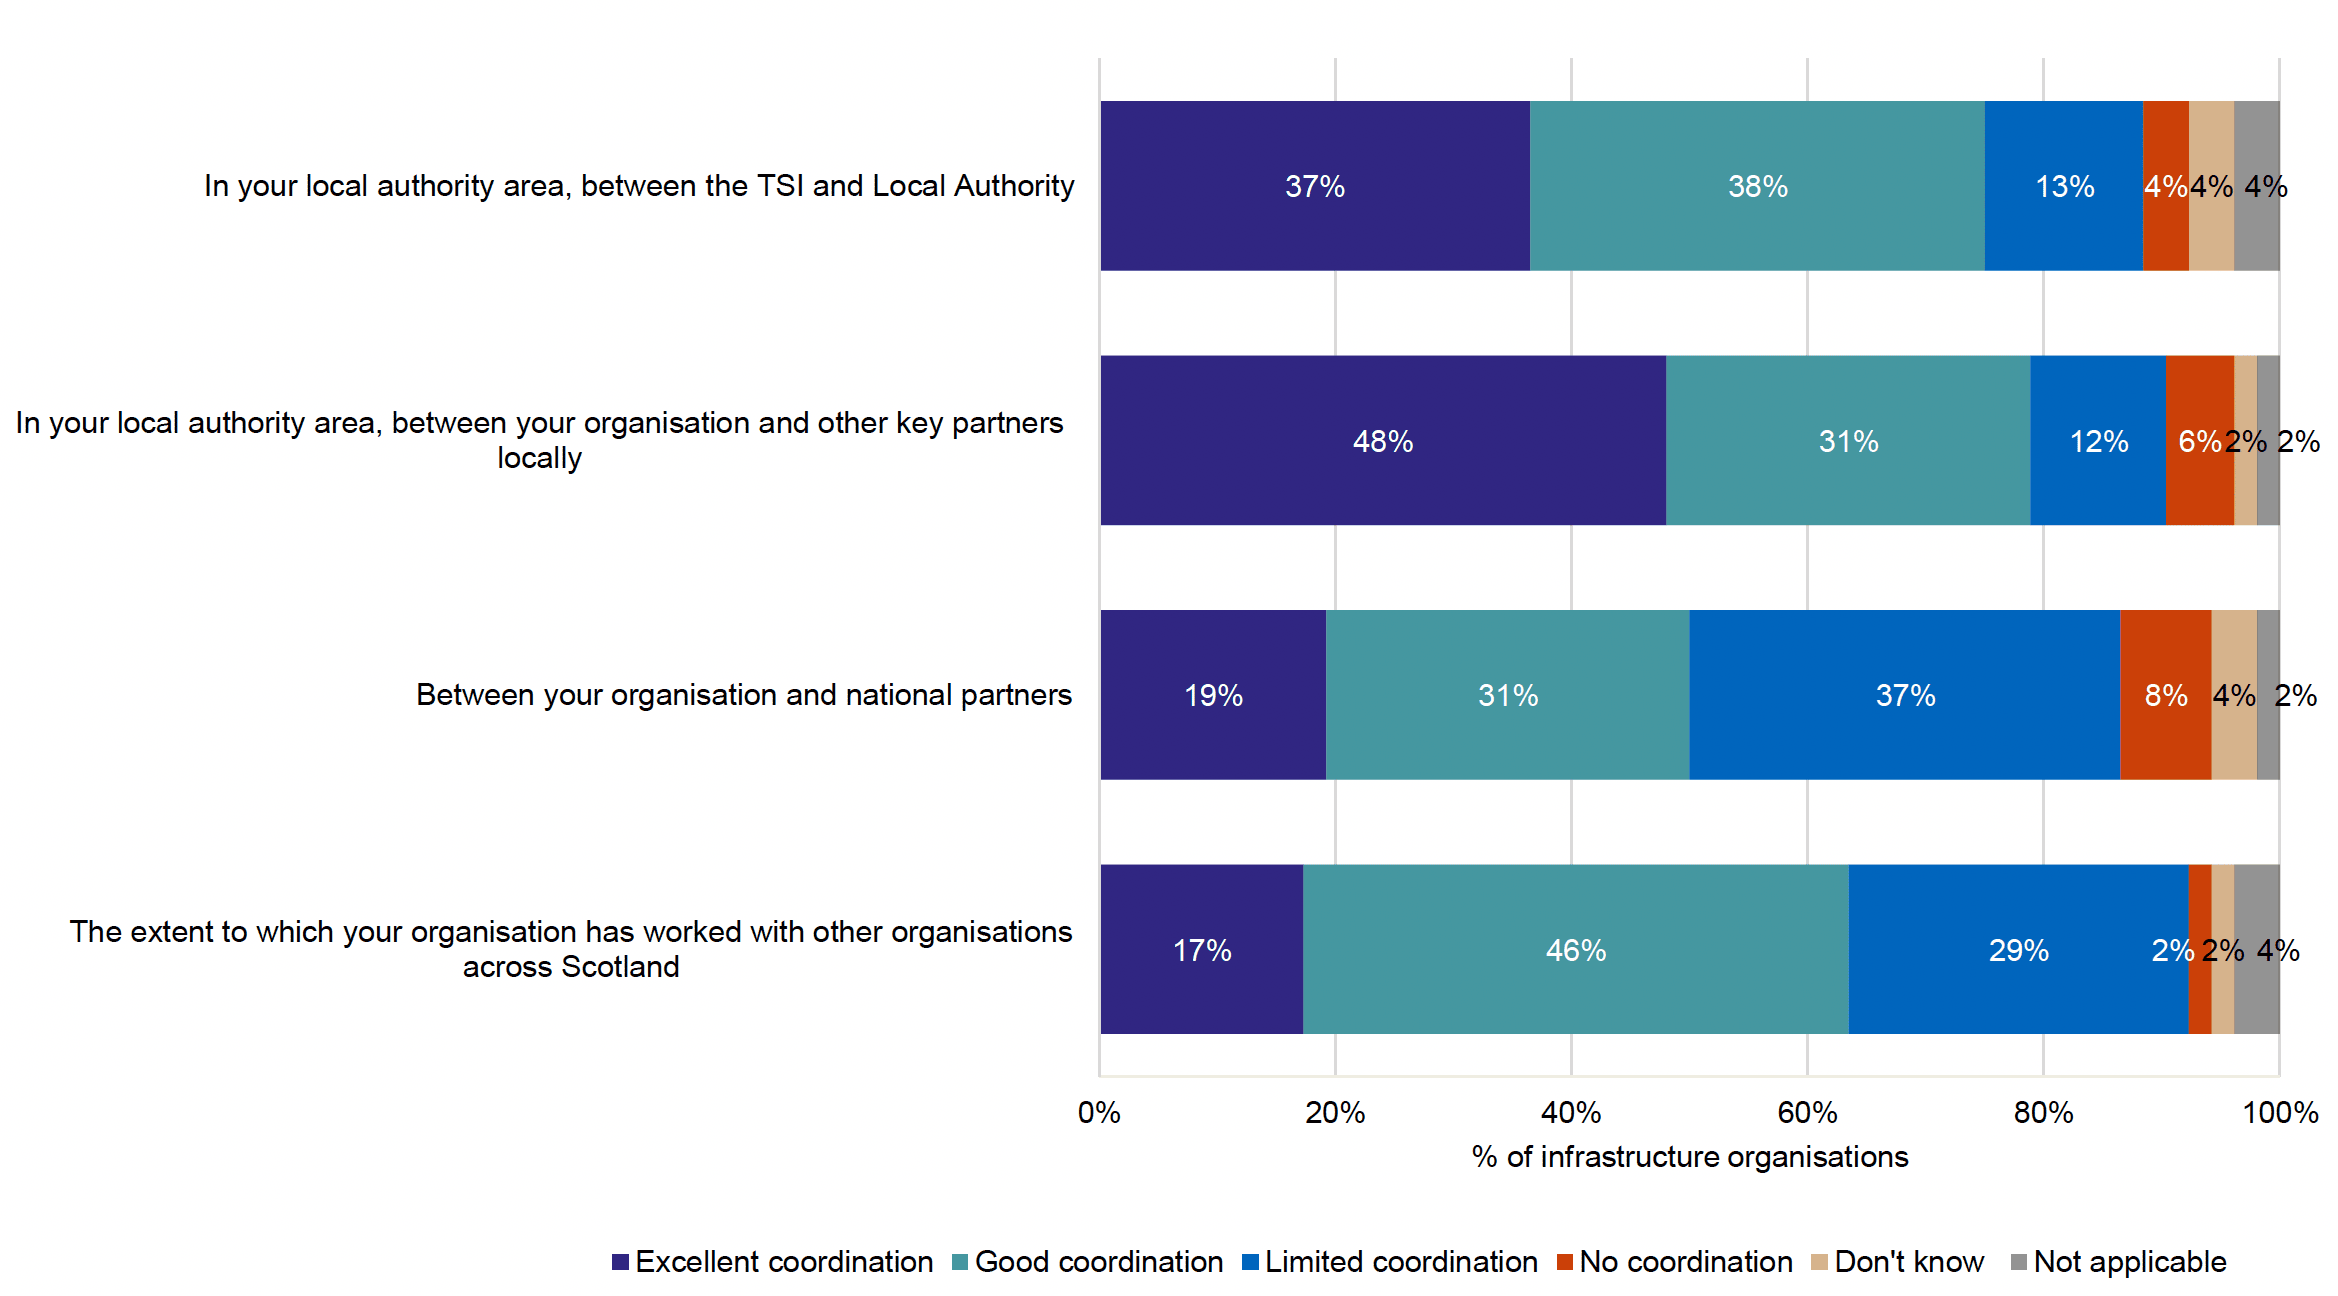 Chart showing infrastructure organisation views on the coordination of the volunteering response between key partners during COVID-19